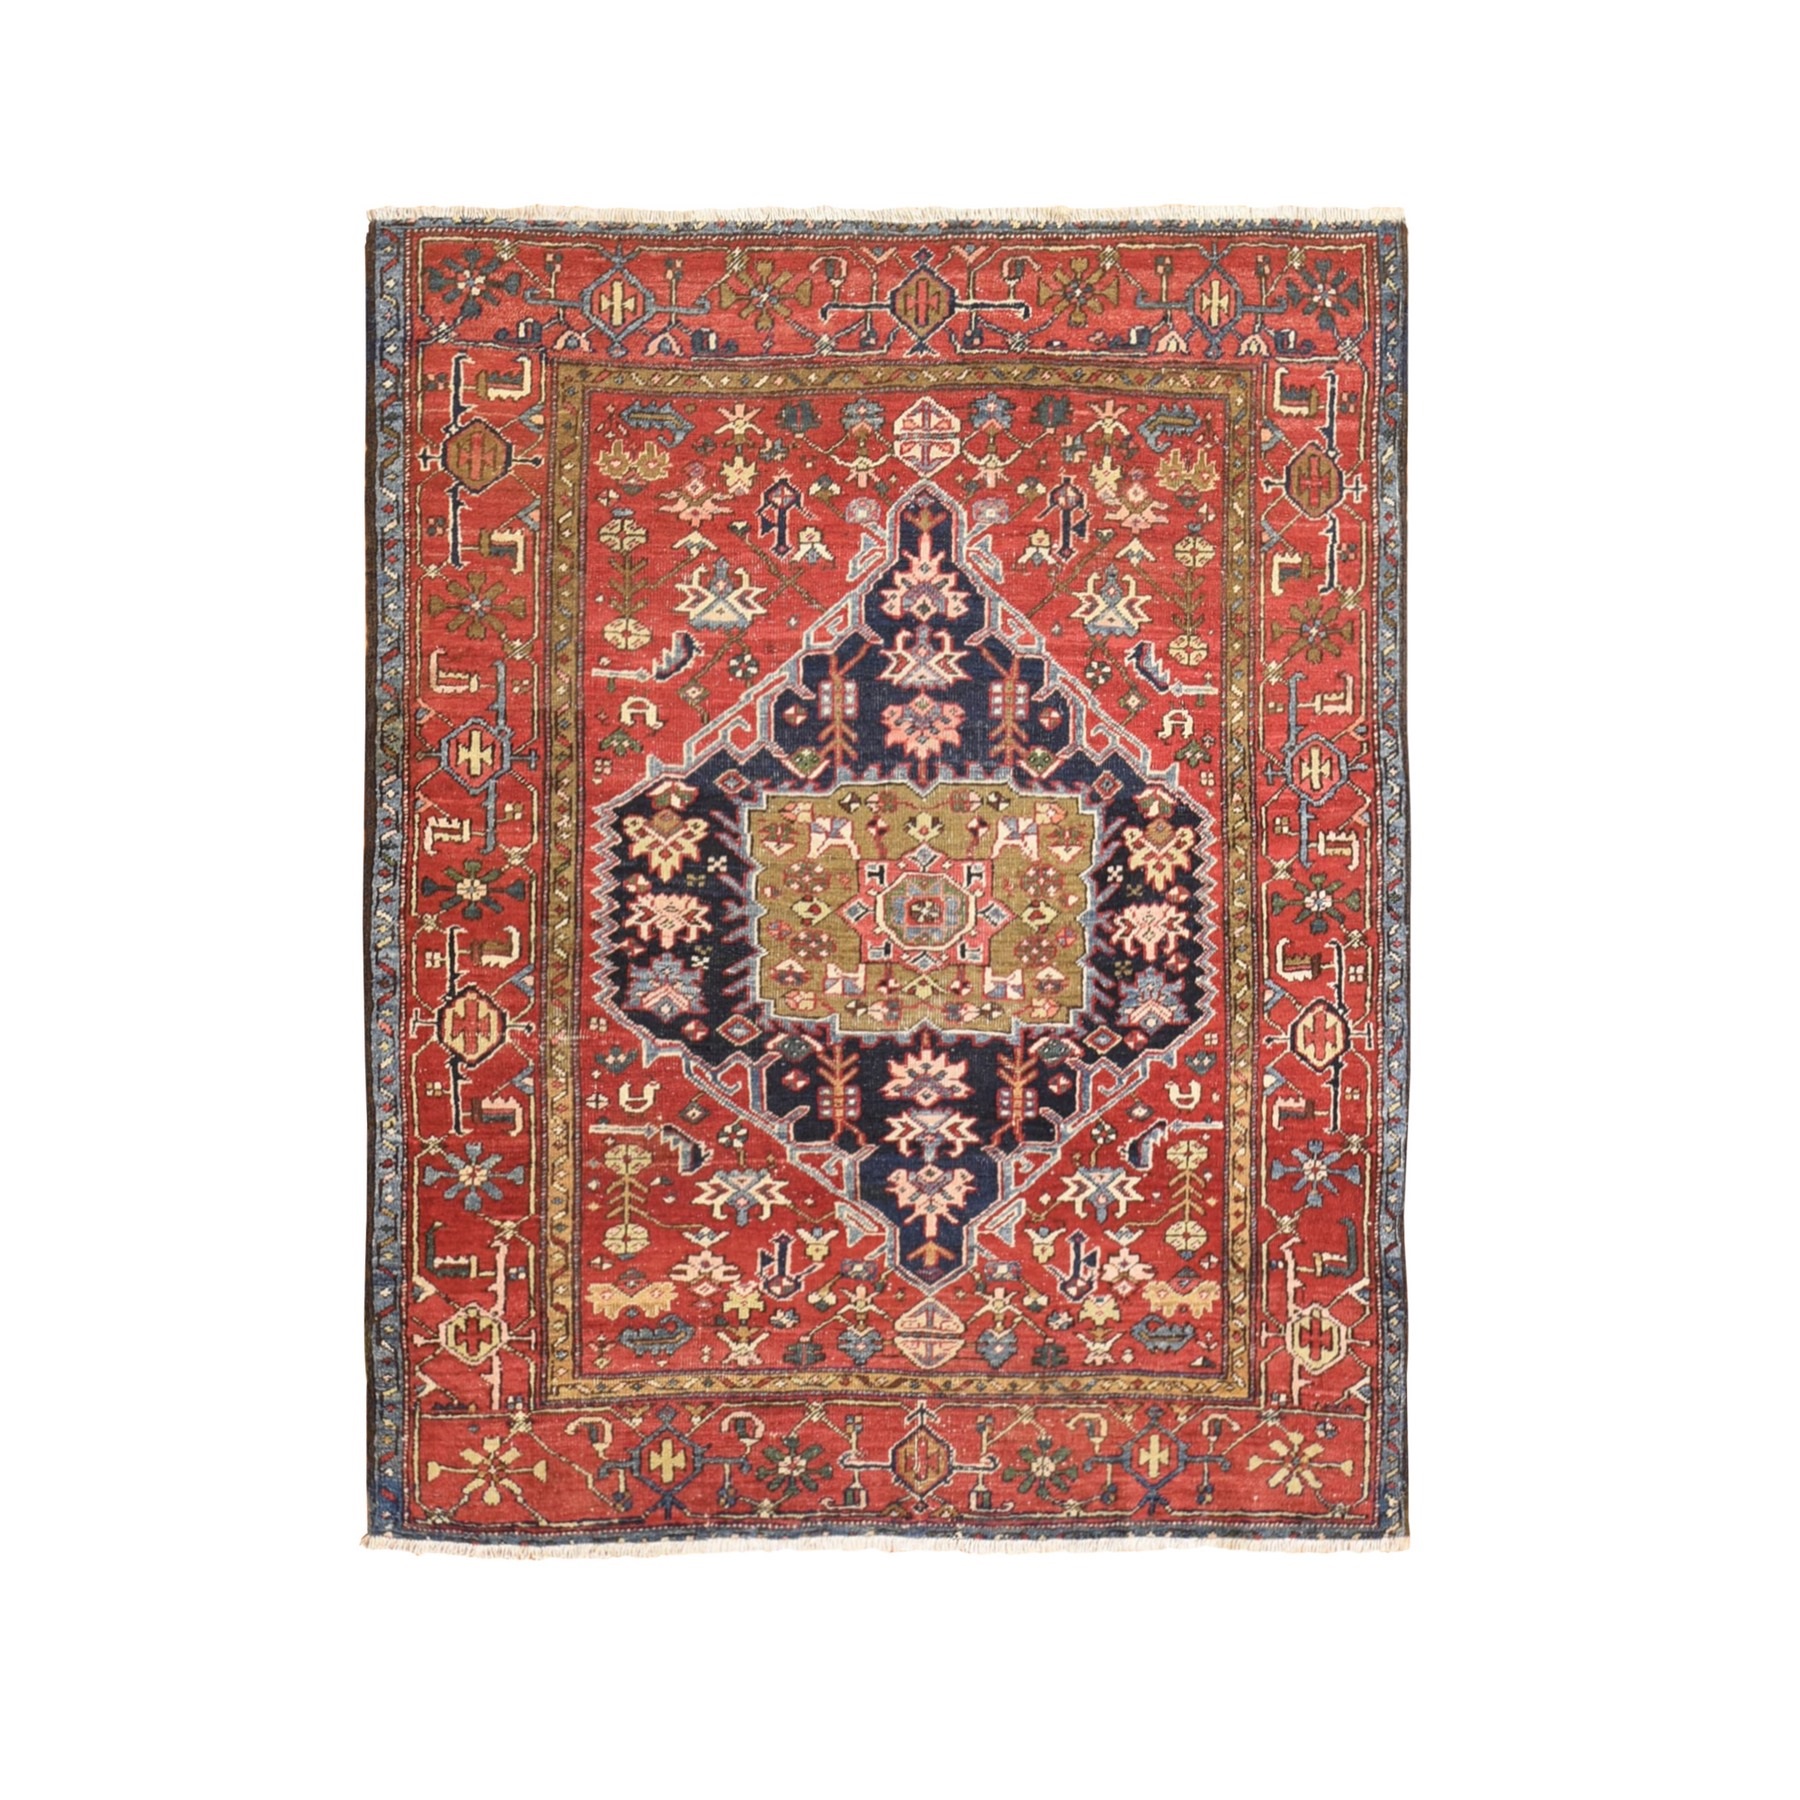 Antique Collection Hand Knotted Blue Rug No: 1132644